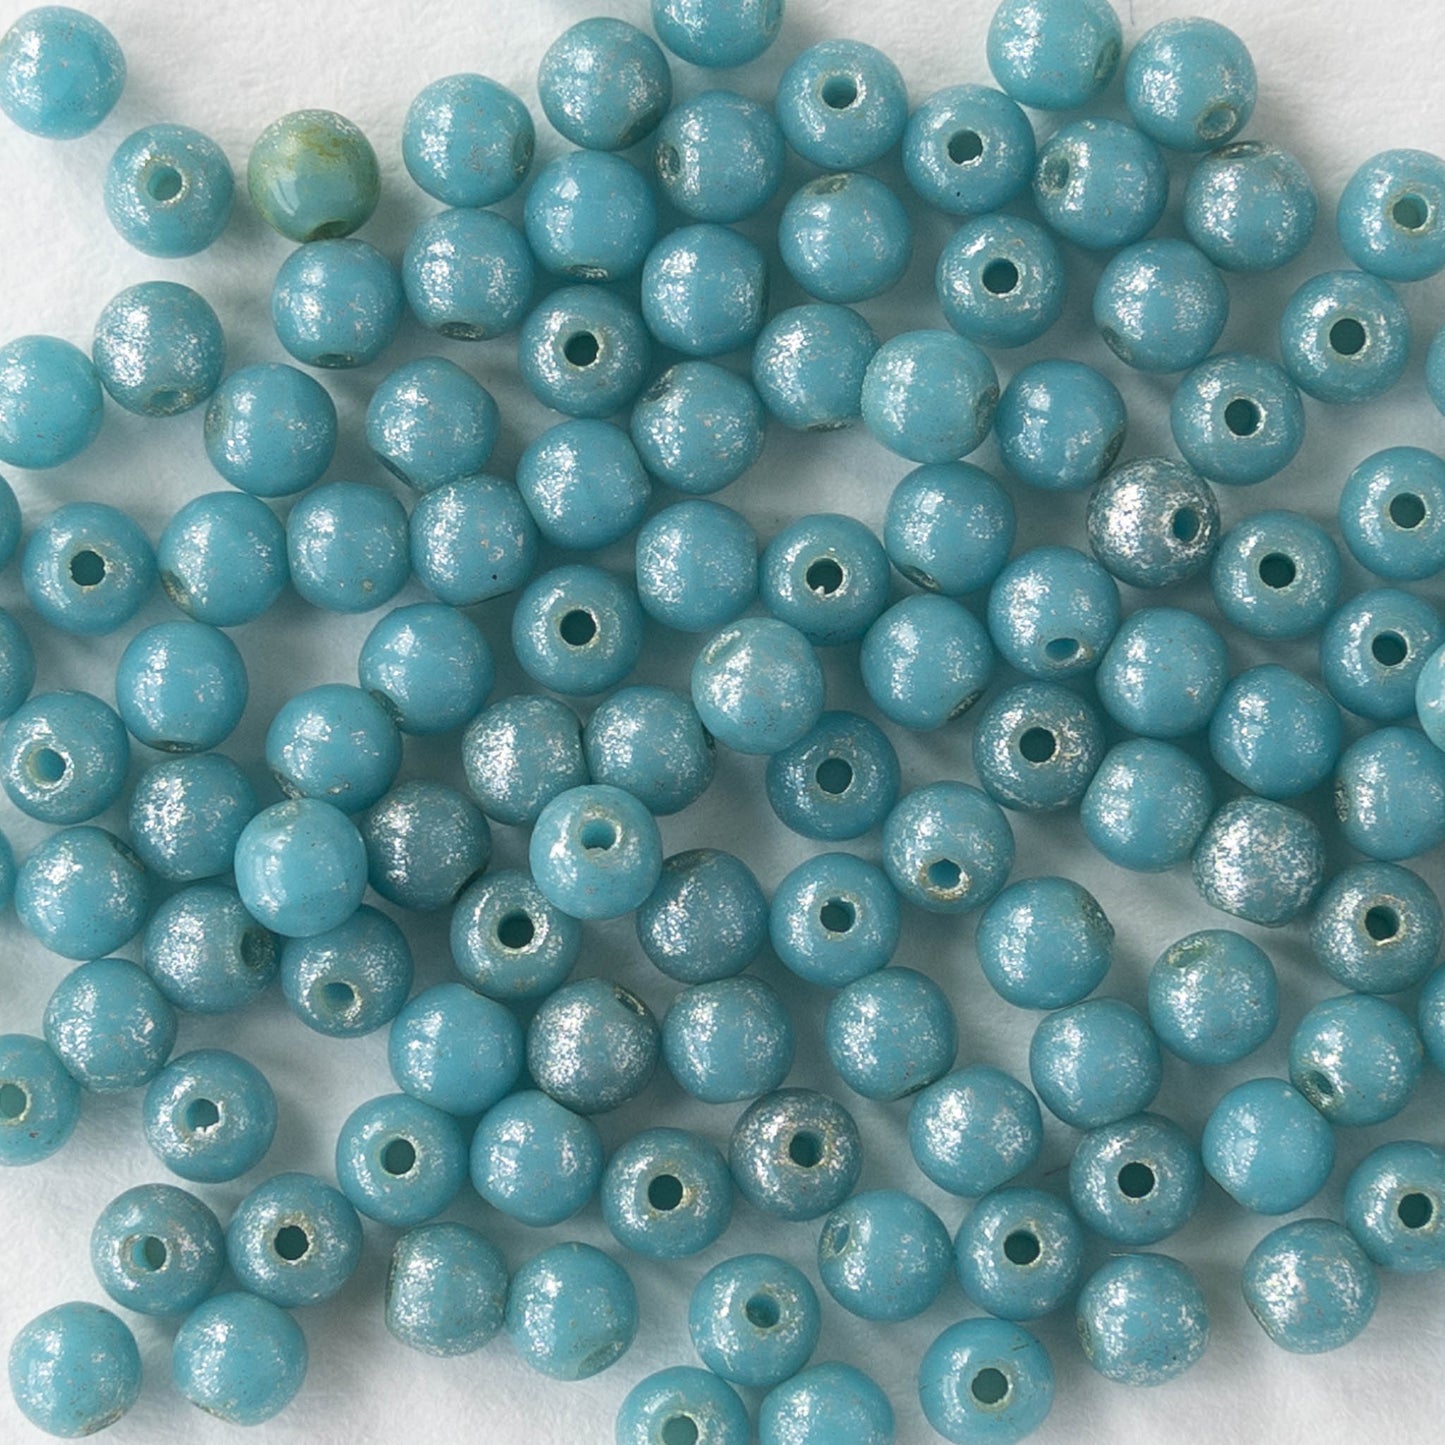 3mm Round Glass Beads - Light Blue with Silver Dust - 120 Beads